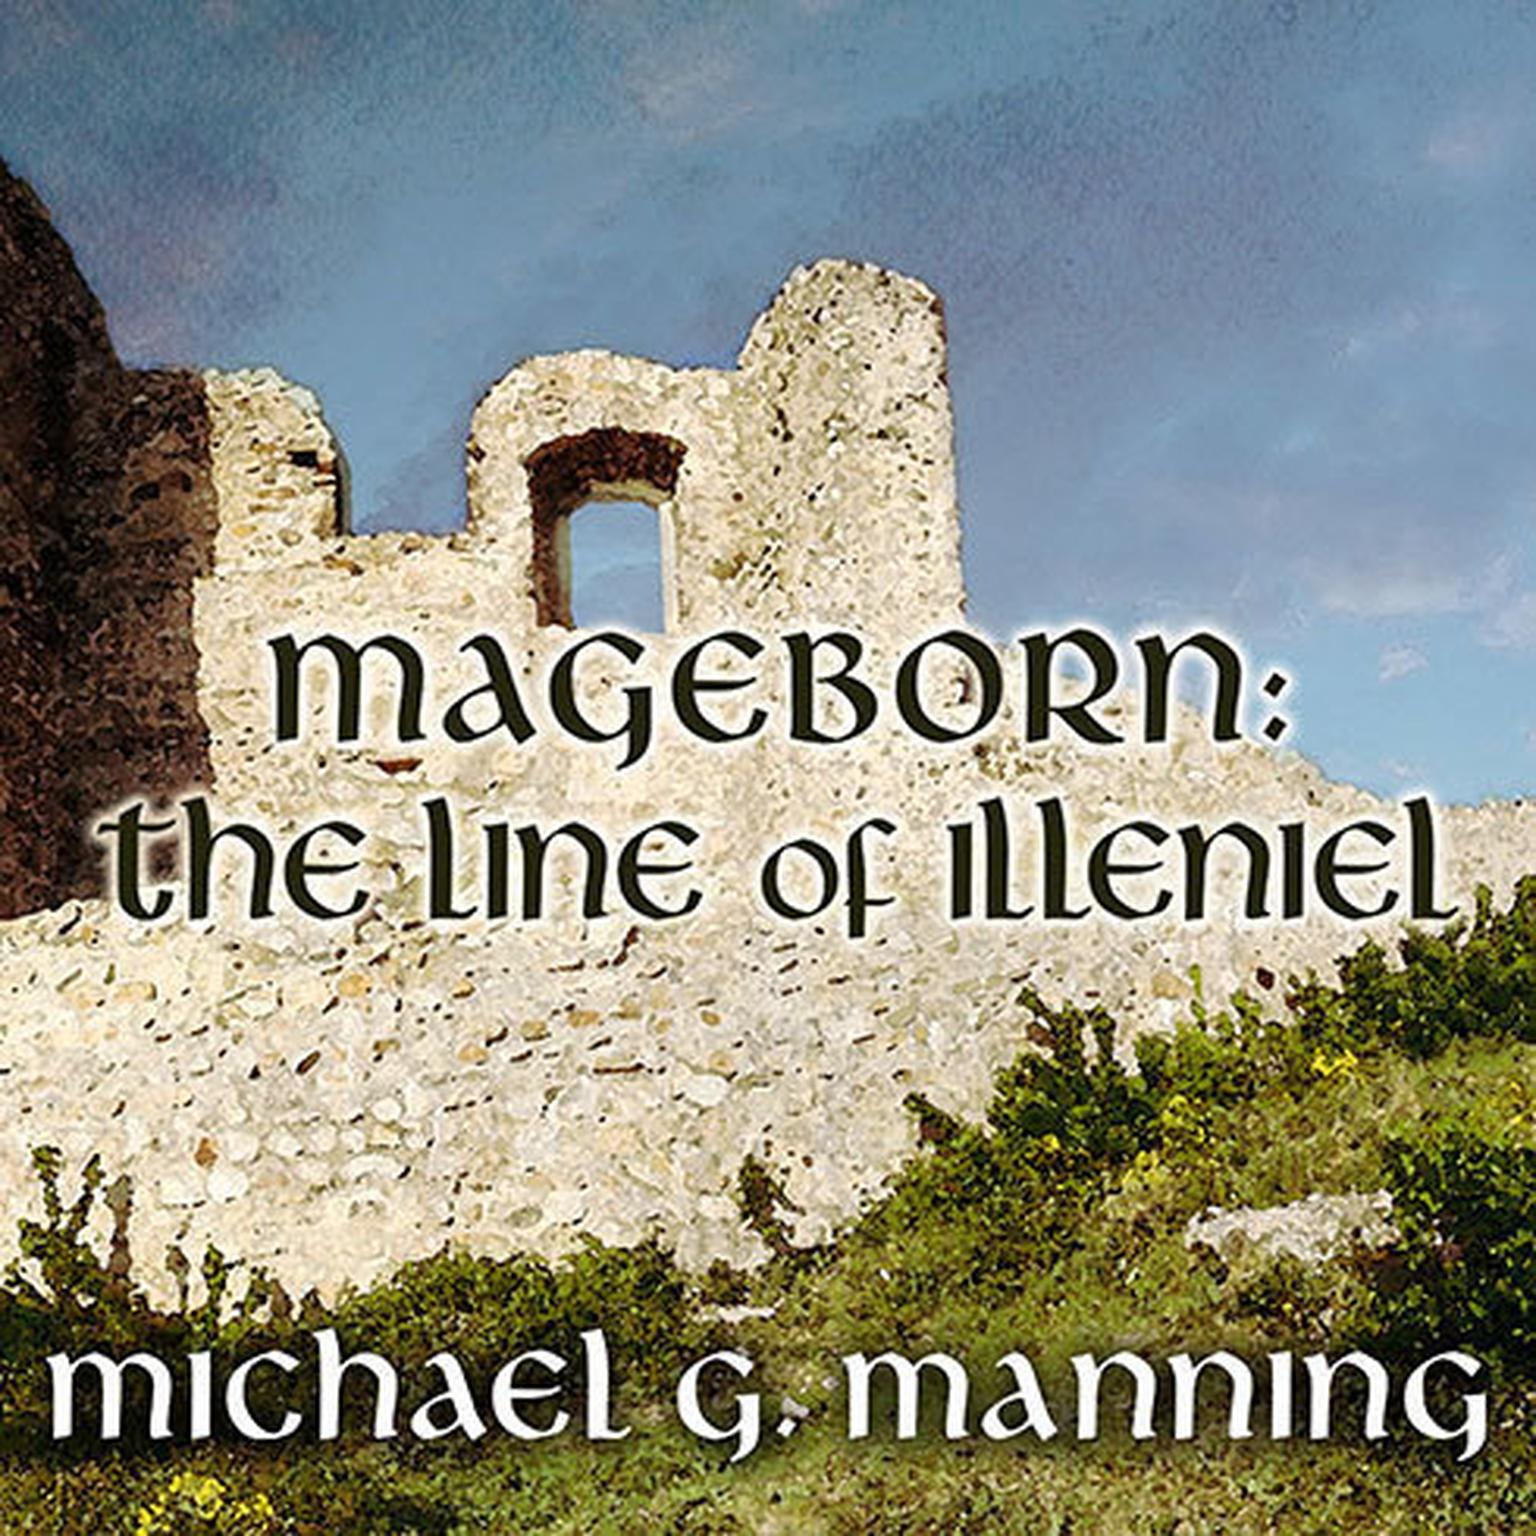 Mageborn: The Line of Illeniel Audiobook, by Michael G. Manning